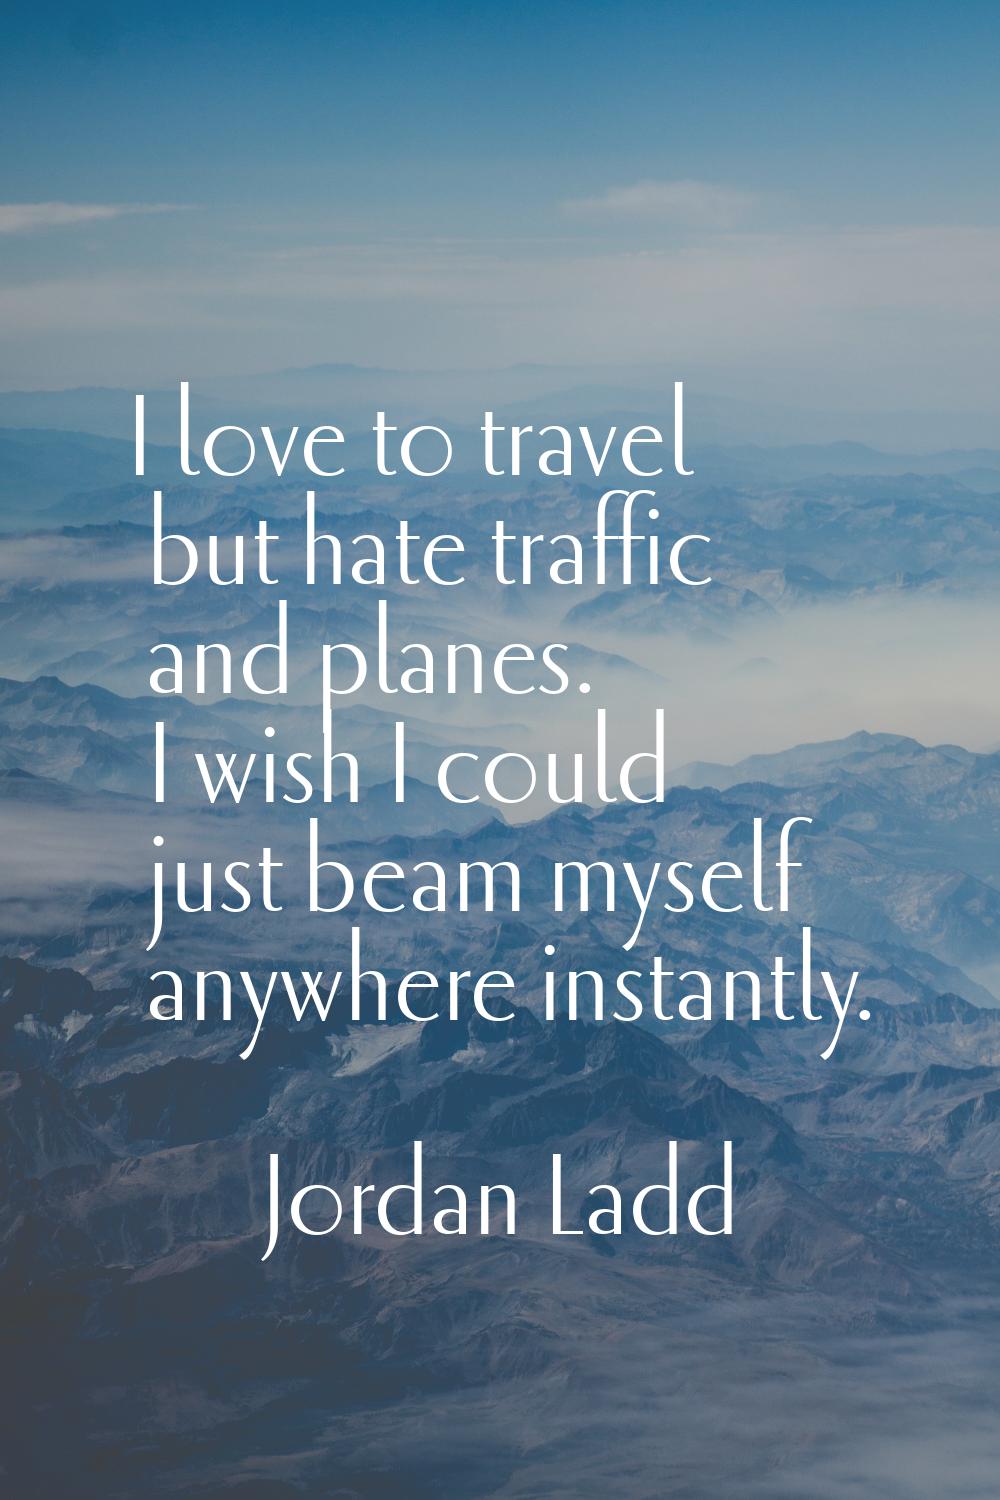 I love to travel but hate traffic and planes. I wish I could just beam myself anywhere instantly.